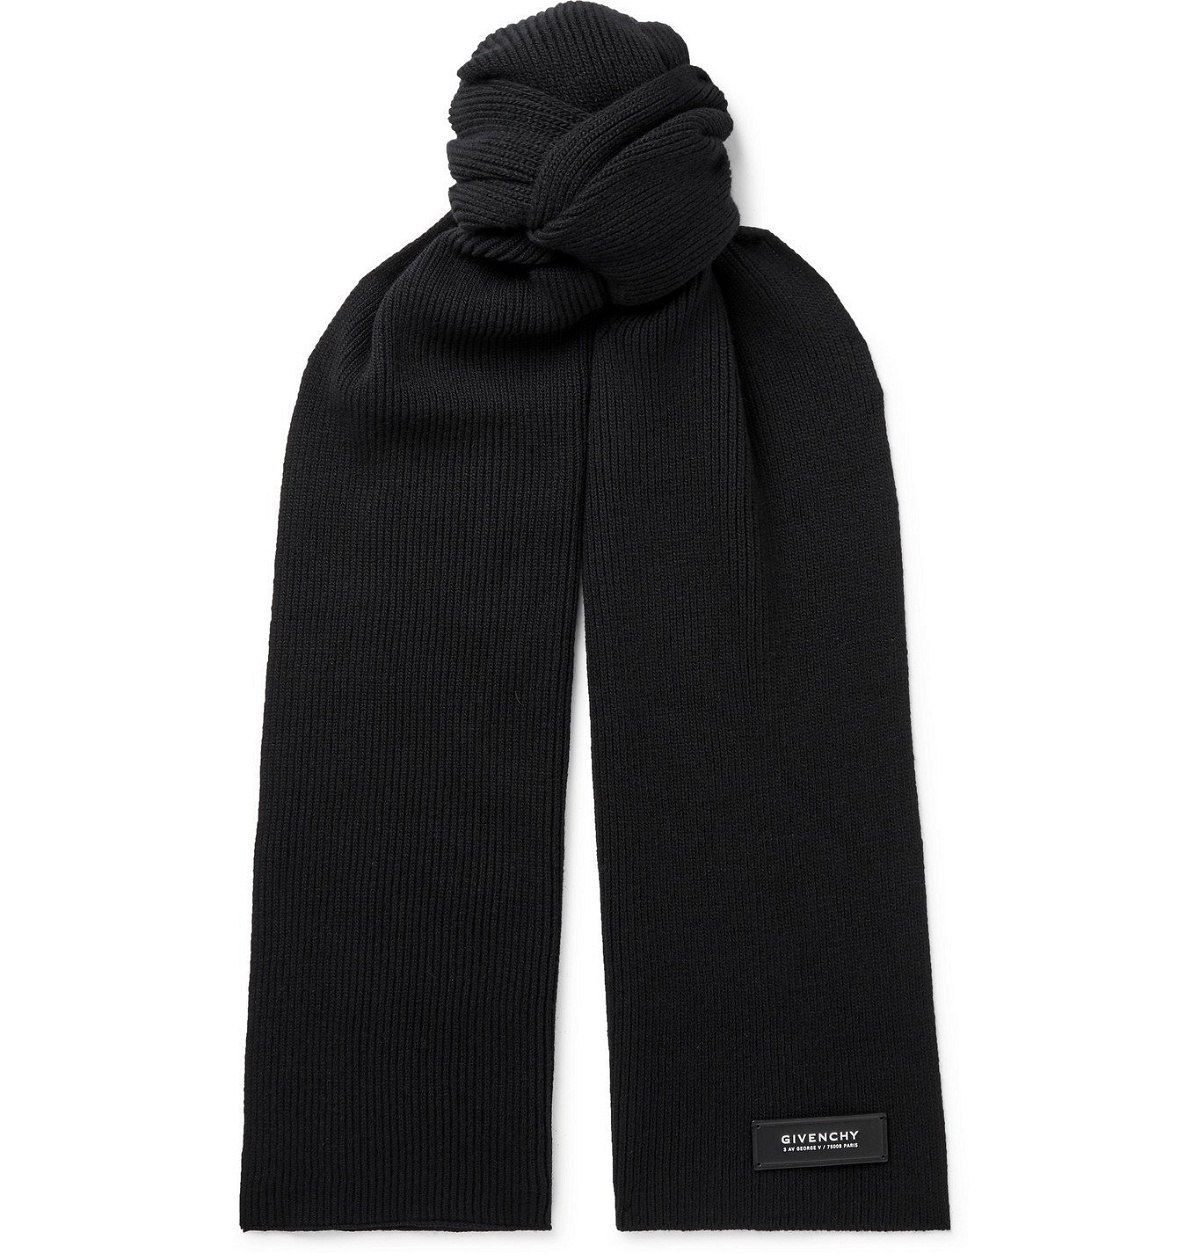 GIVENCHY - Logo-Detailed Ribbed Wool and Cashmere-Blend Scarf - Black ...